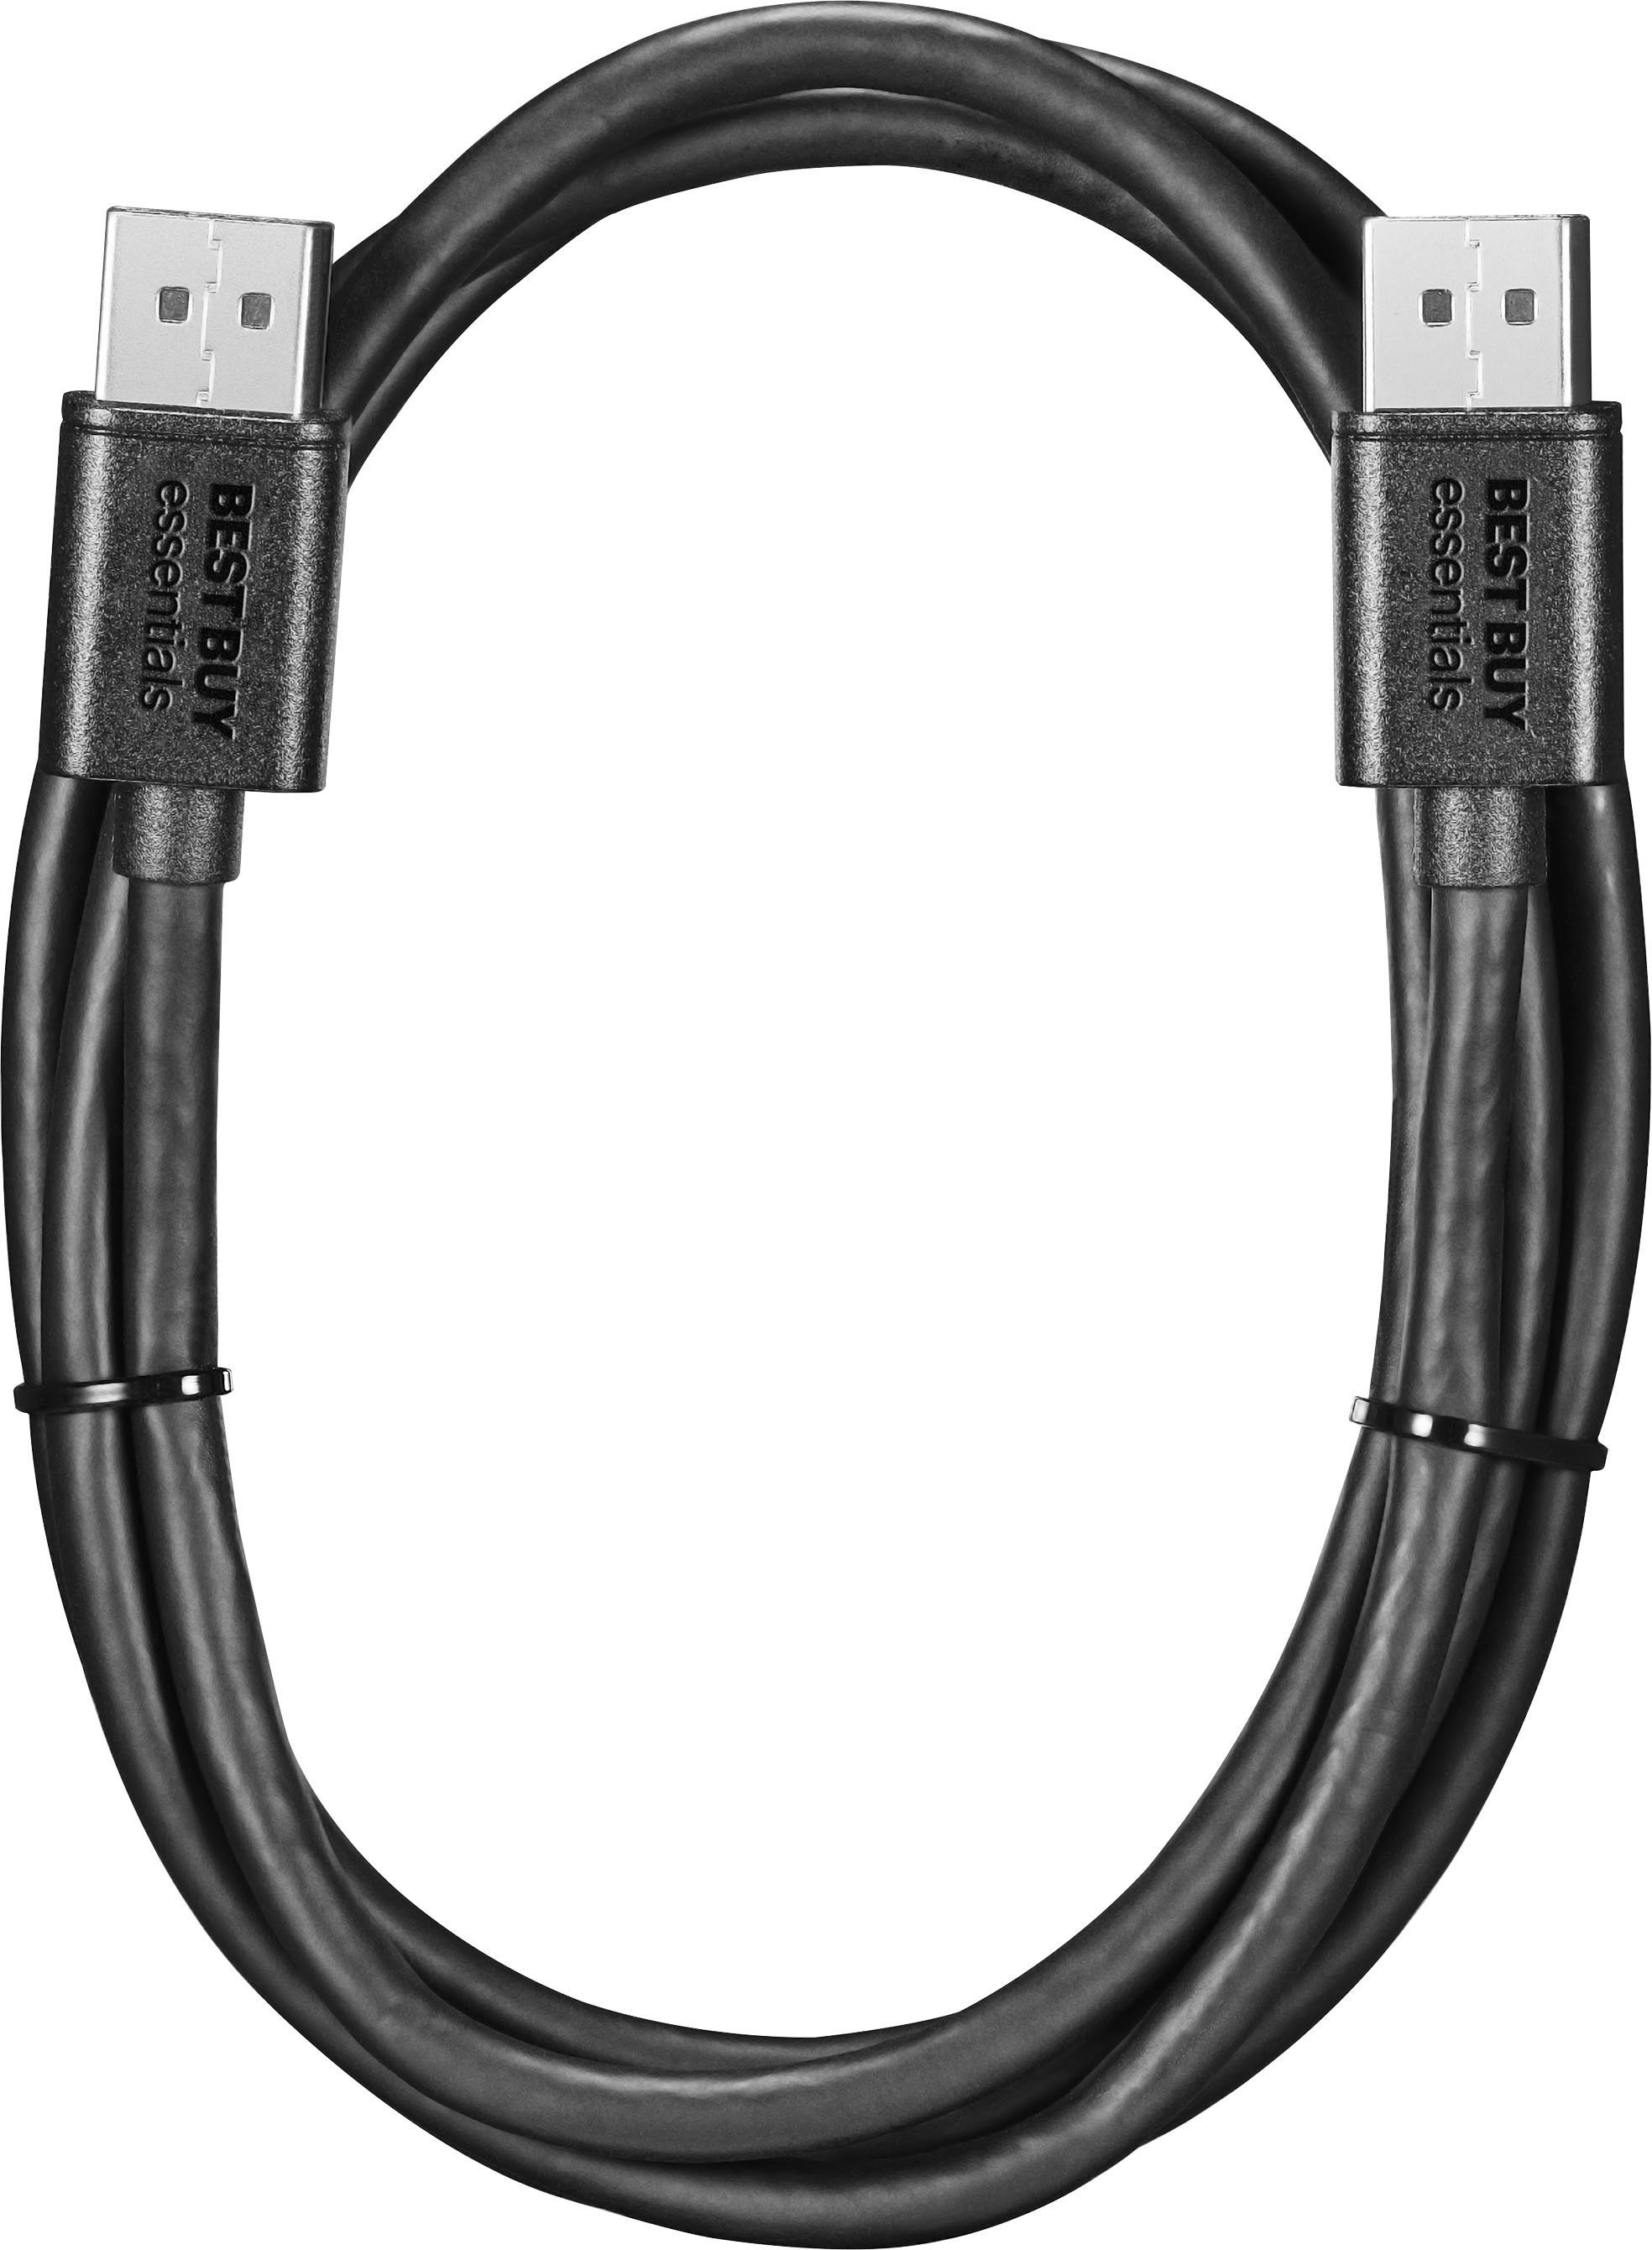 Best Buy: Insignia™ 10' DisplayPort Cable Black NS-PDD1019